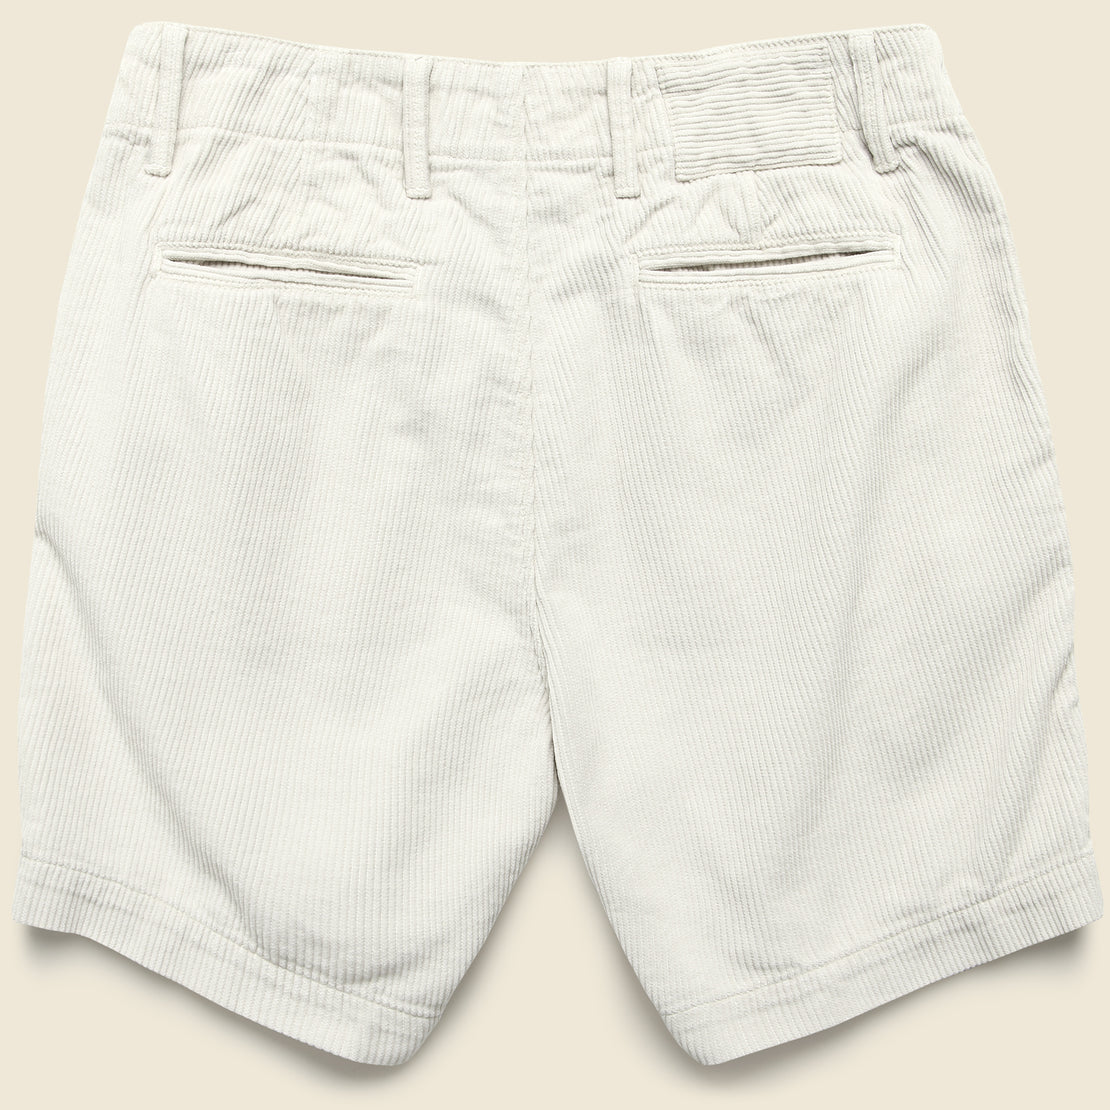 Button Fly Wale Corduroy Short - Ash - Save Khaki - STAG Provisions - Shorts - Solid